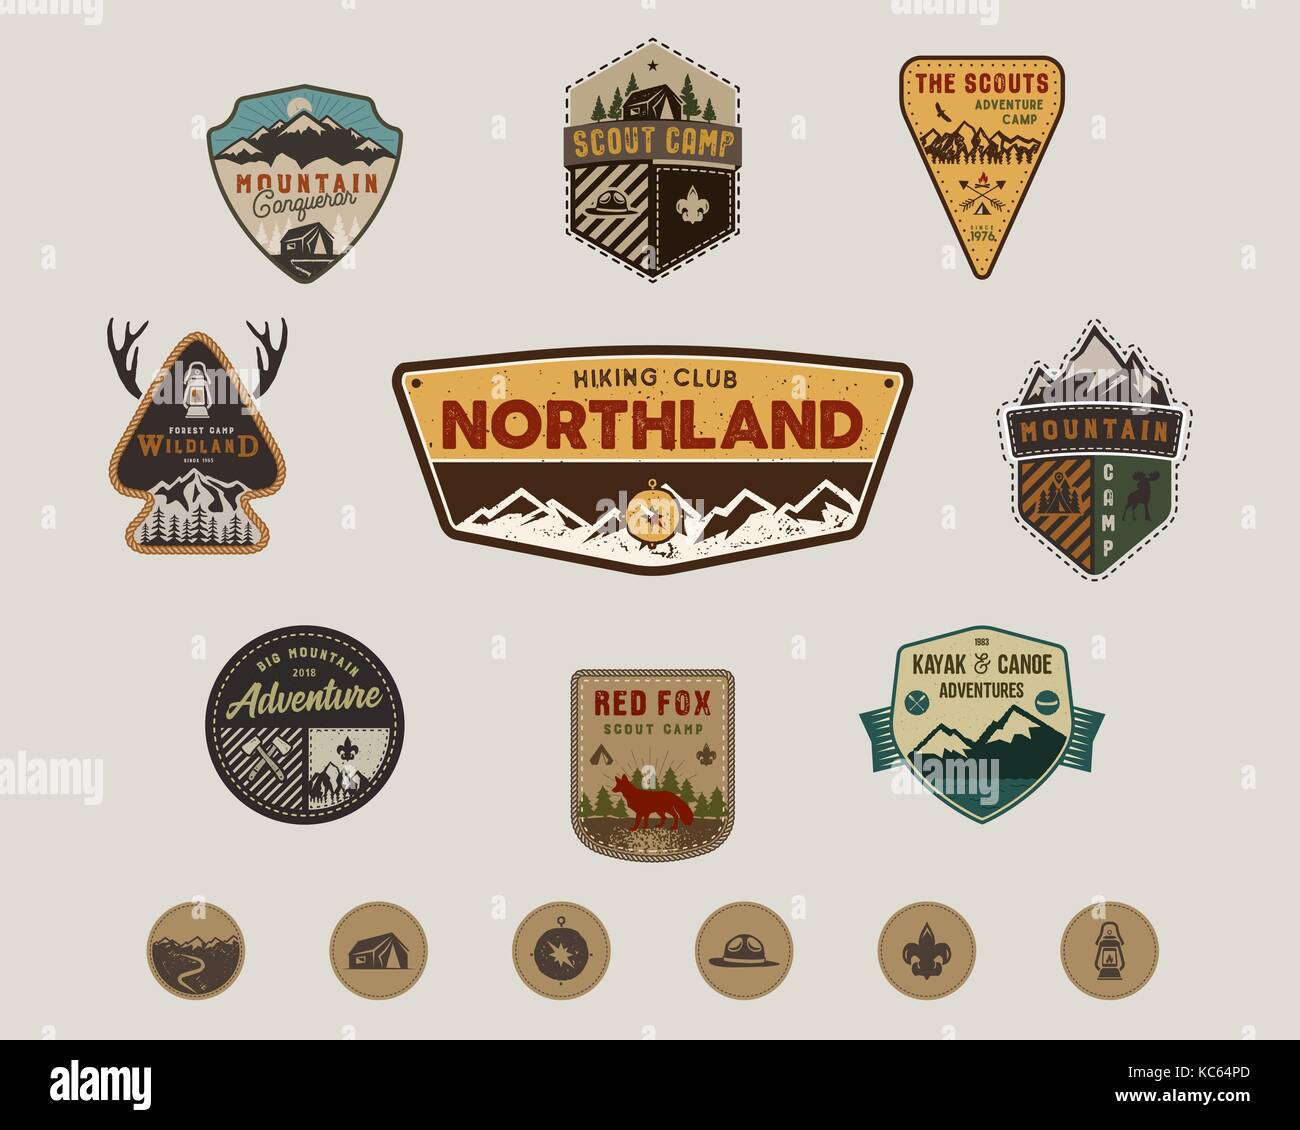 Traveling, outdoor badge collection. Scout camp emblem set and hiking stickers, icons. Vintage hand drawn design. Stock vector illustration, insignias, rustic patches. Isolated on white background Stock Vector